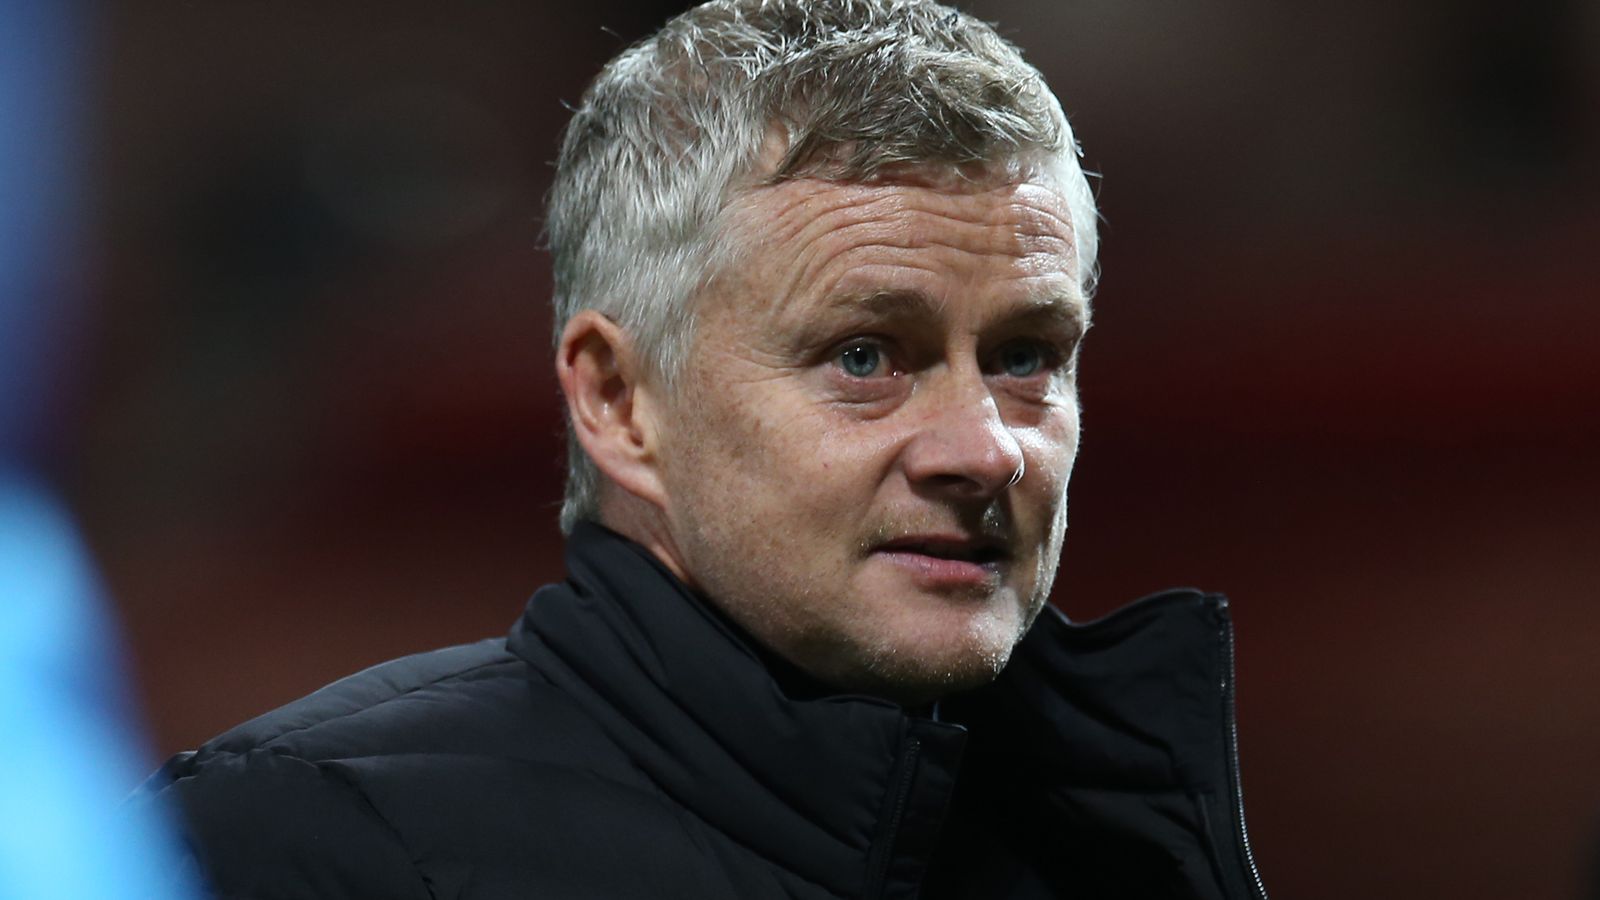 ole-gunnar-solskjaer-manchester-united-manager-frustrated-premier-league-clubs-voted-against-five-substitutes